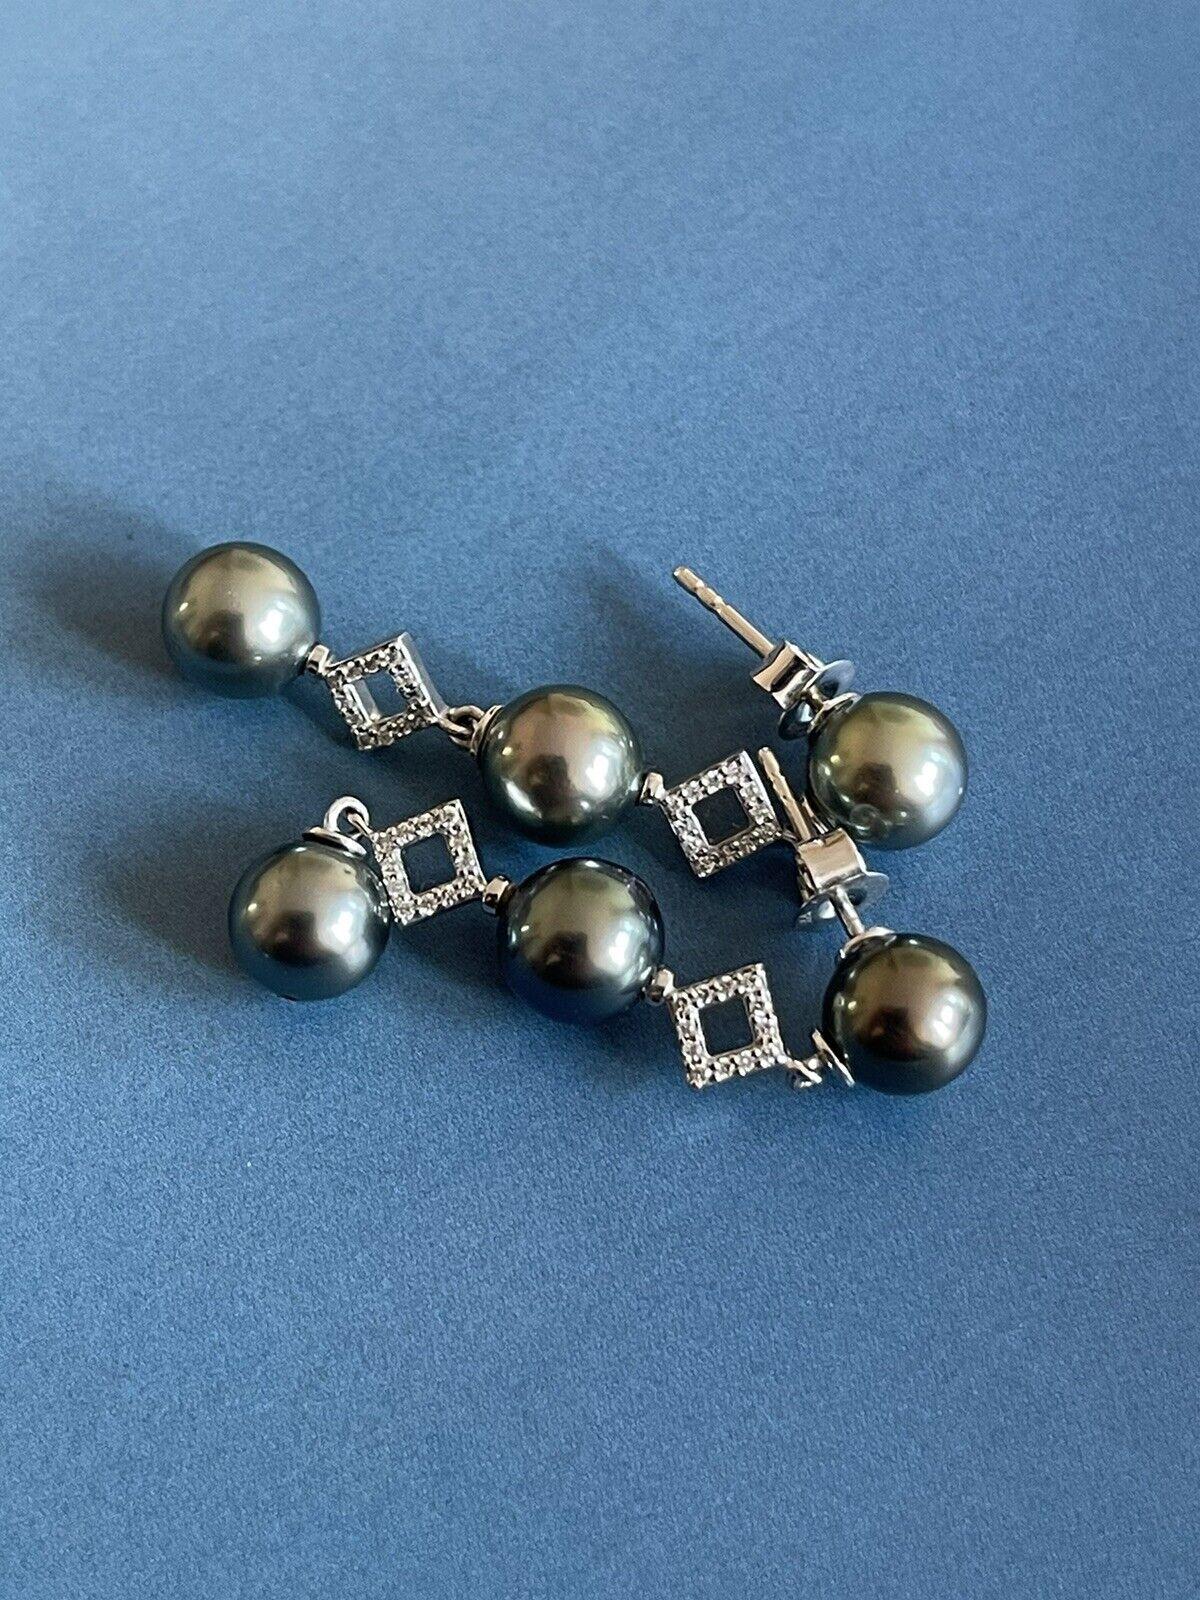 18ct White Gold Diamond Earrings With Peacock Pearl Drops 0.40ct Cocktail Studs In New Condition For Sale In Ilford, GB